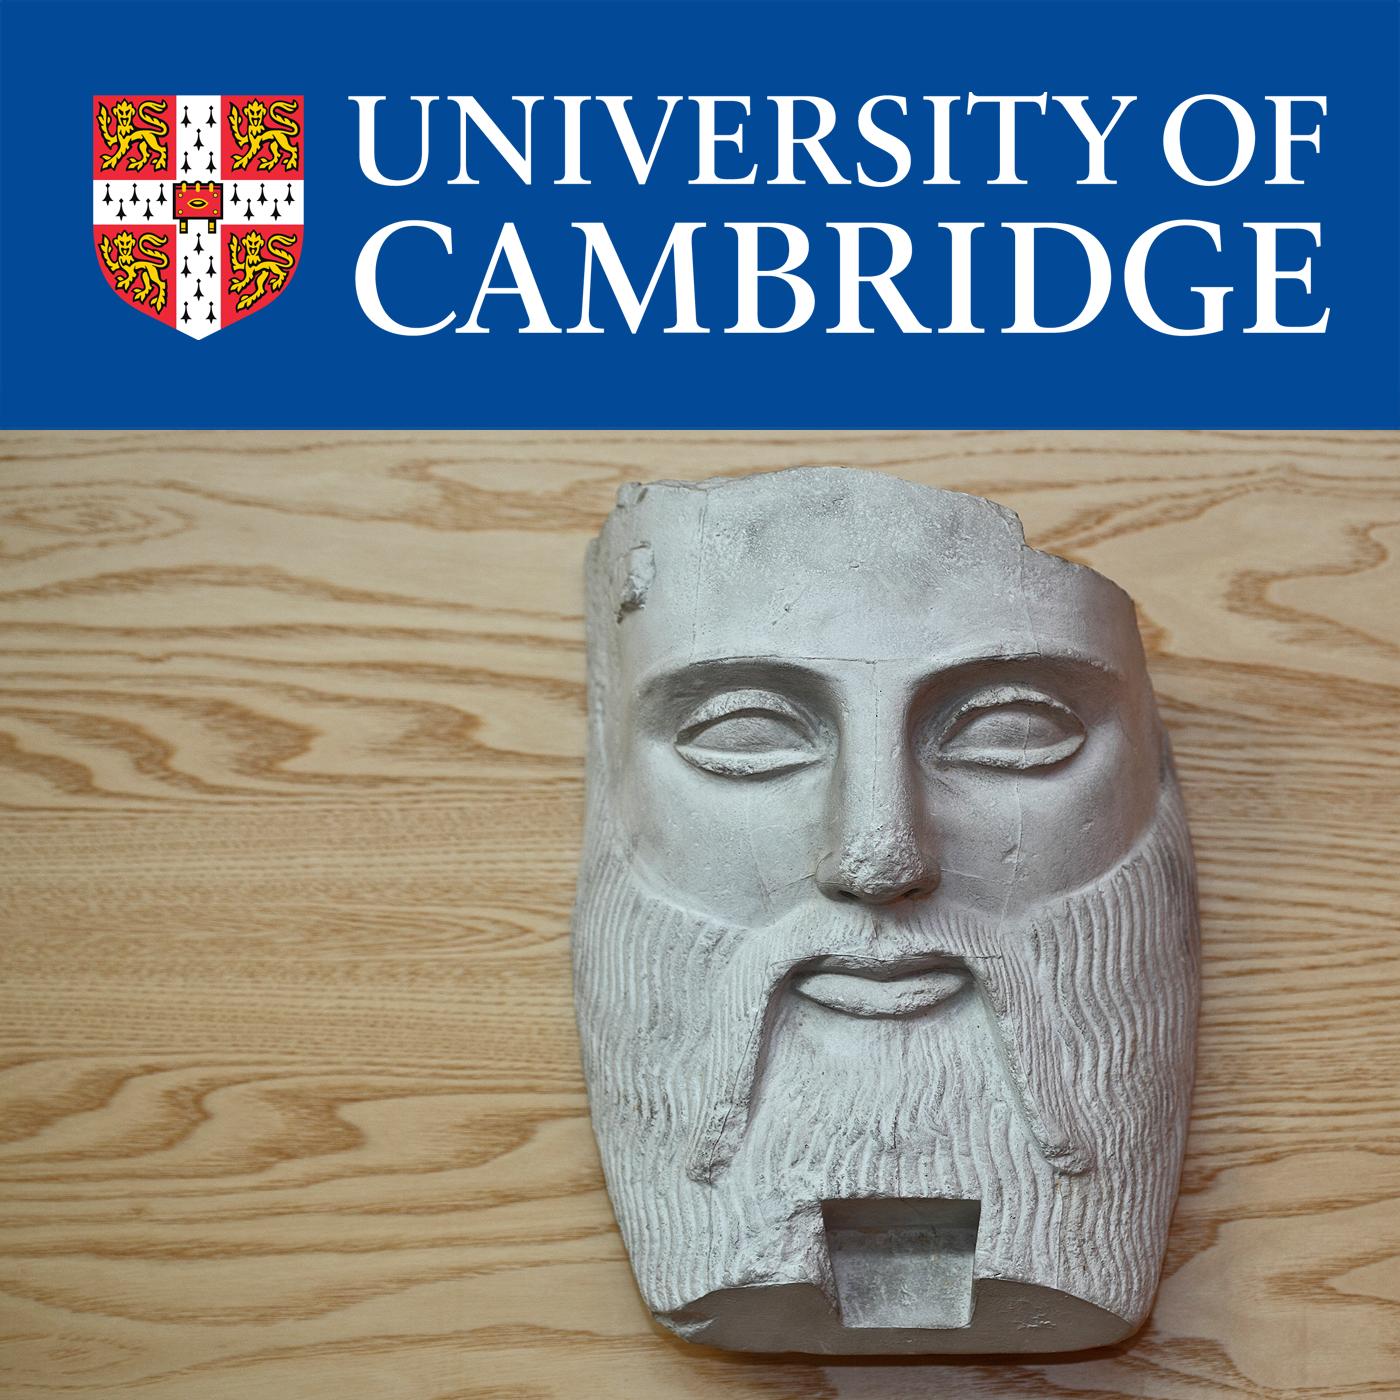 Aspects of Philosophy at Cambridge